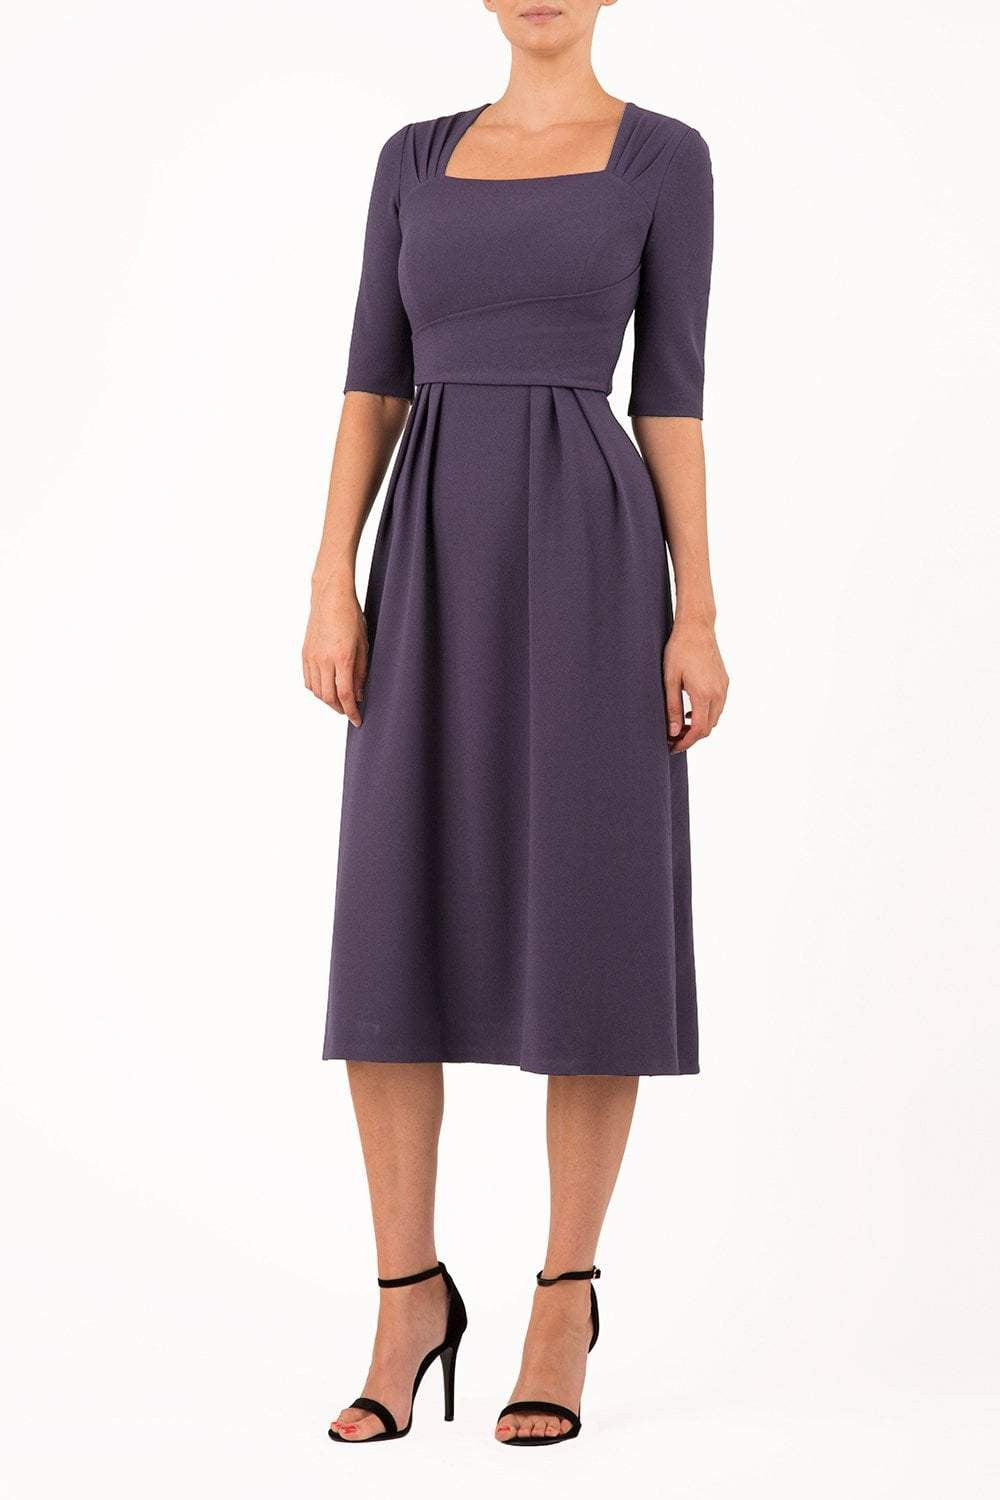 model is wearing diva catwalk mimi maxi sleeved dress with square neckline in dark mauve front